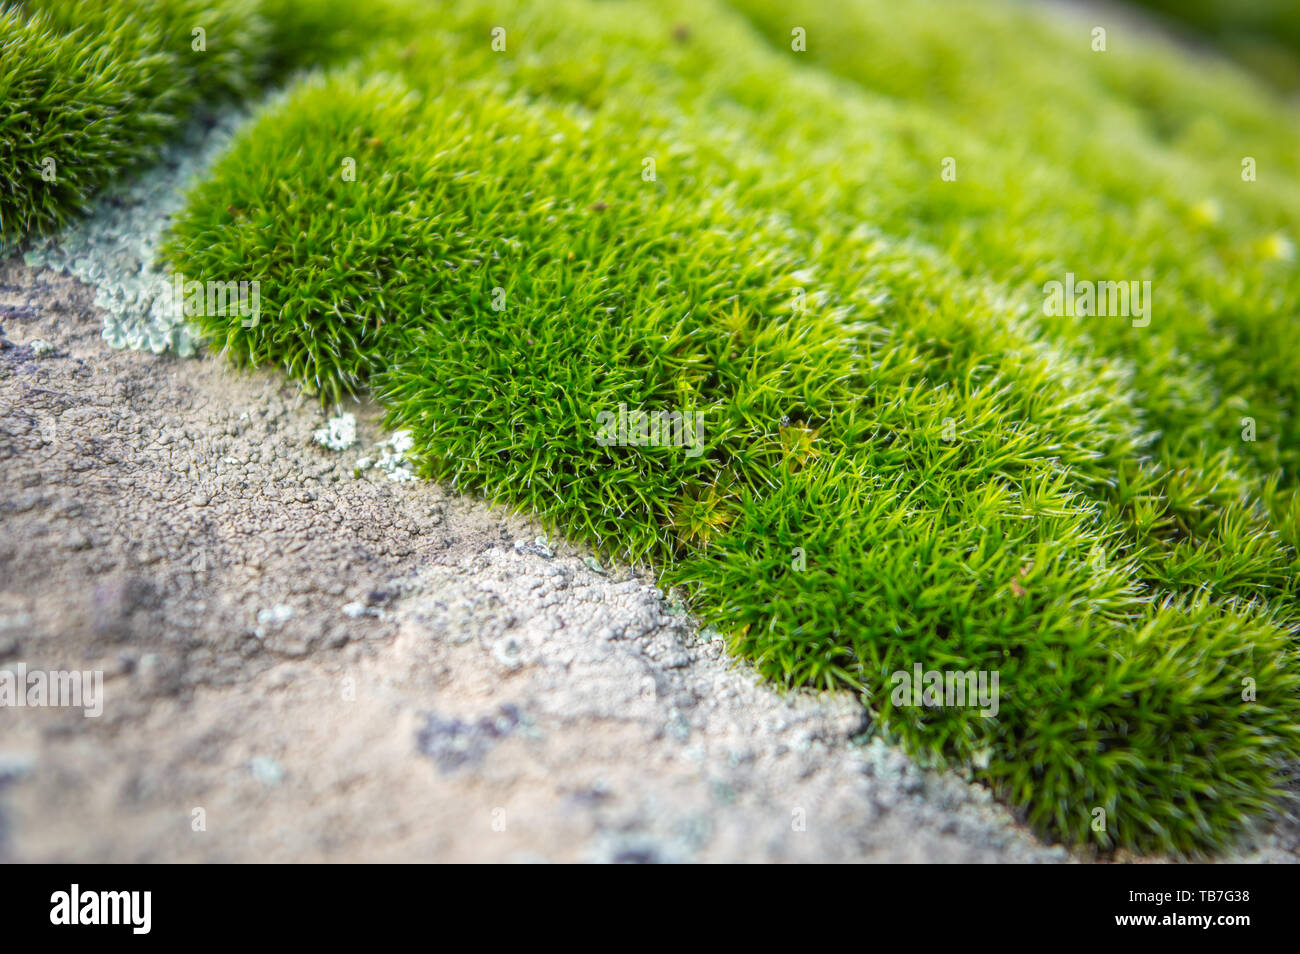 Lush green grass patch growing on a rocky surface. Selective focus with shallow depth of field Stock Photo